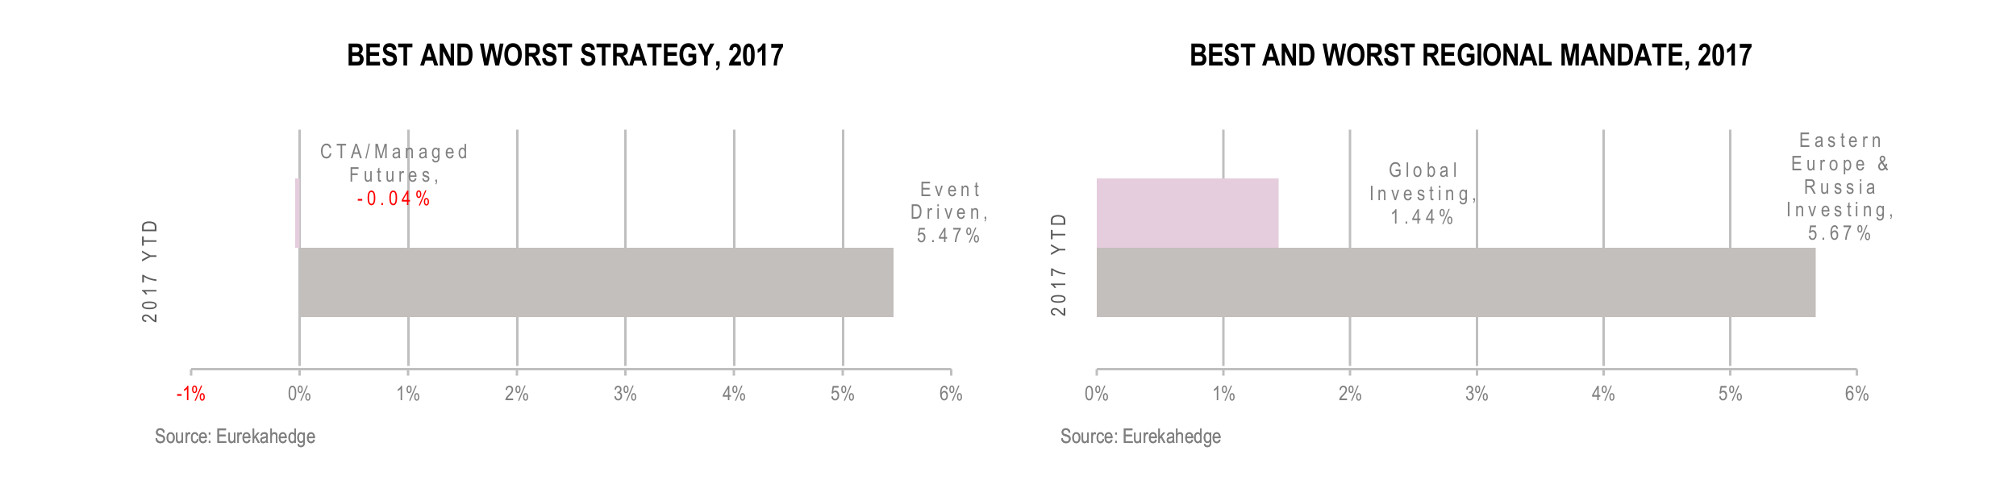 European Hedge Fund Infographic July 2017 - best worst strategy and regional mandate